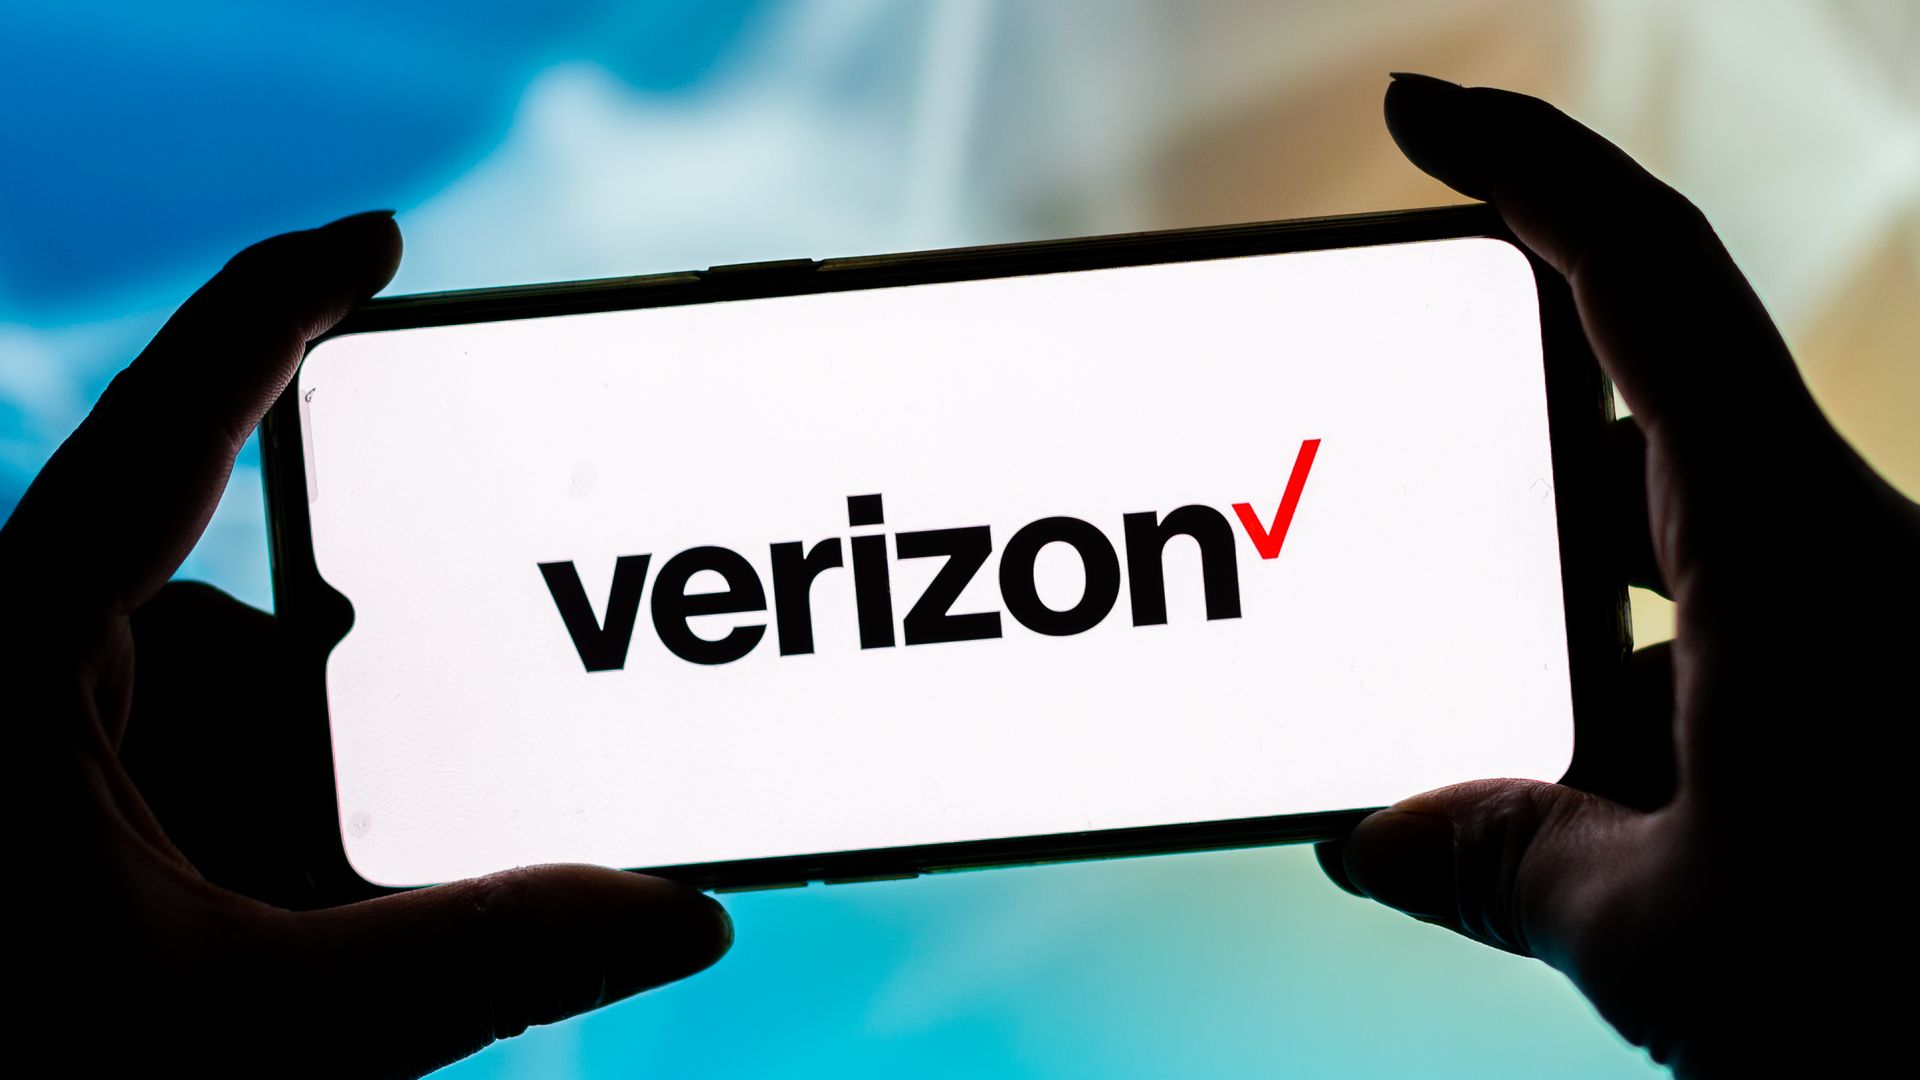 A photo illustration of a smartphone with the Verizon logo on the screen.